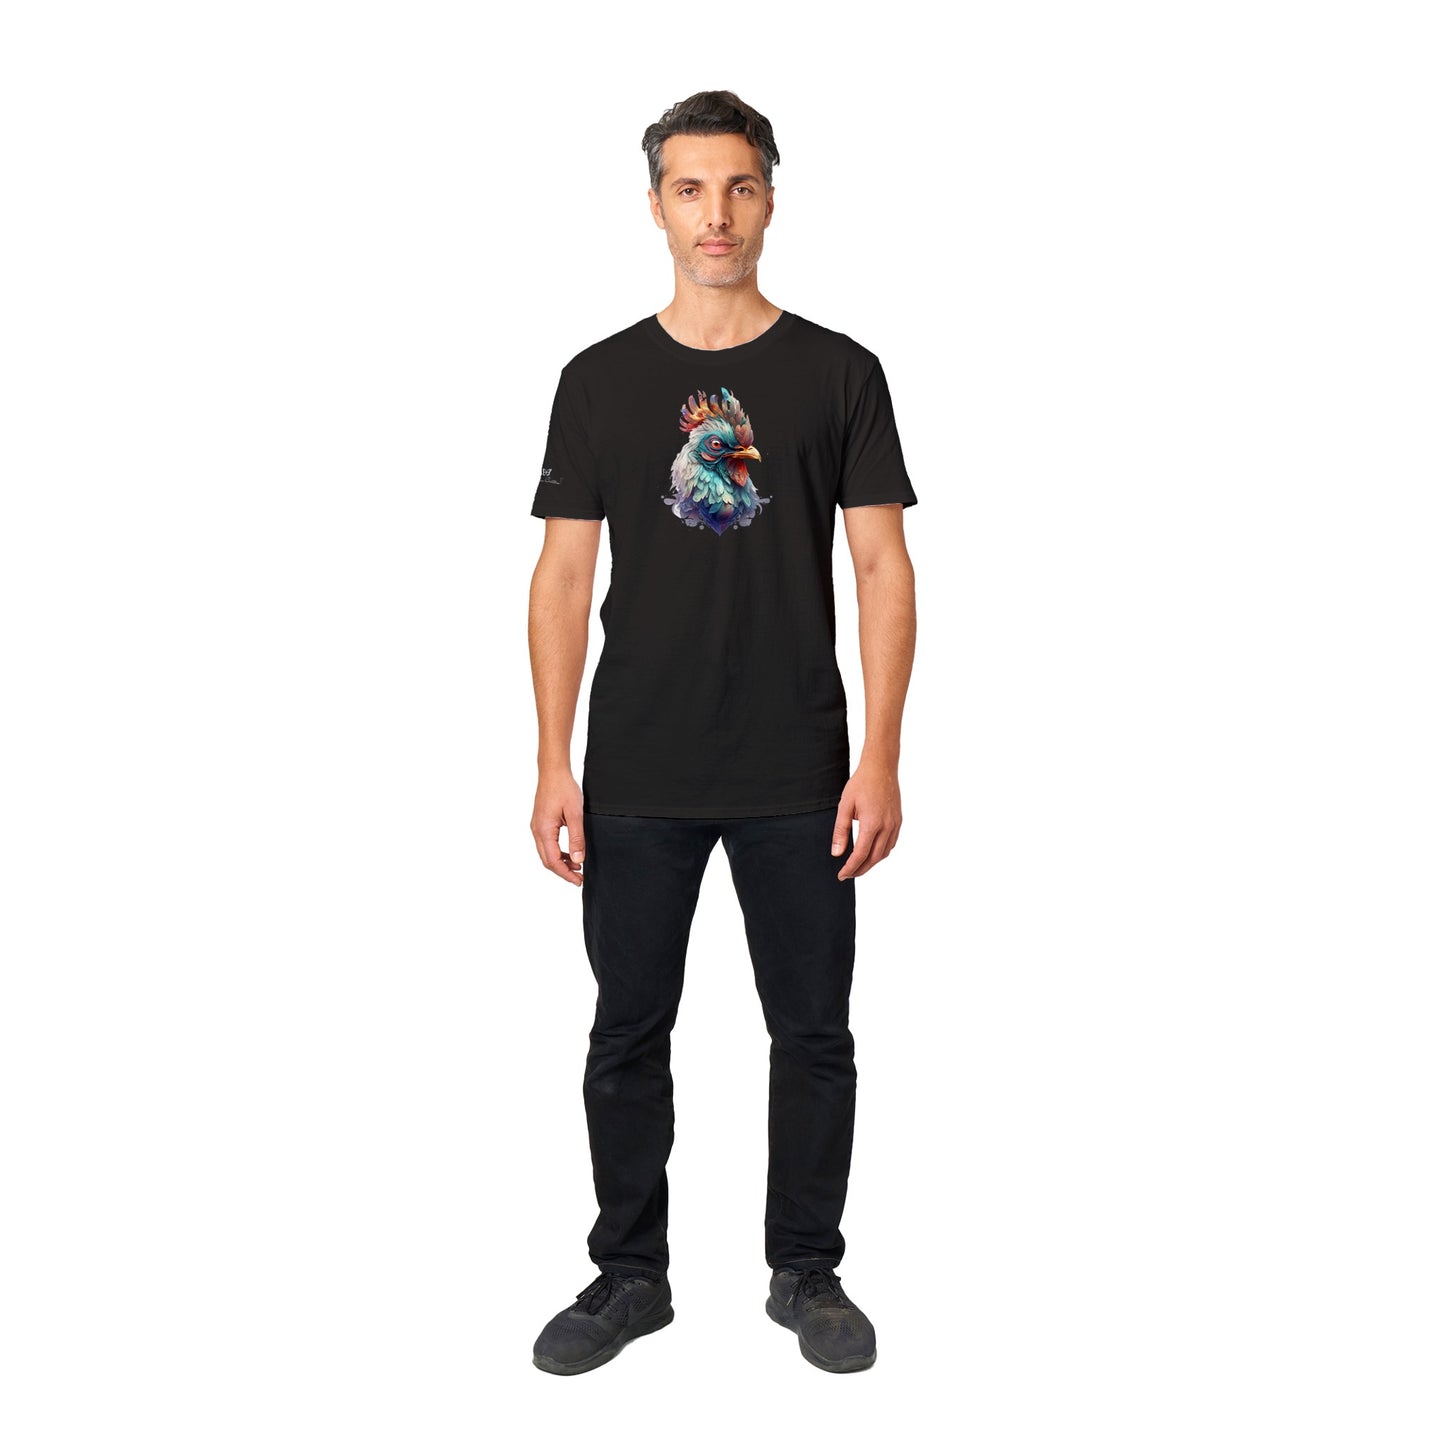 Fantasy Outraged Rooster - Unisex Crewneck T-shirt